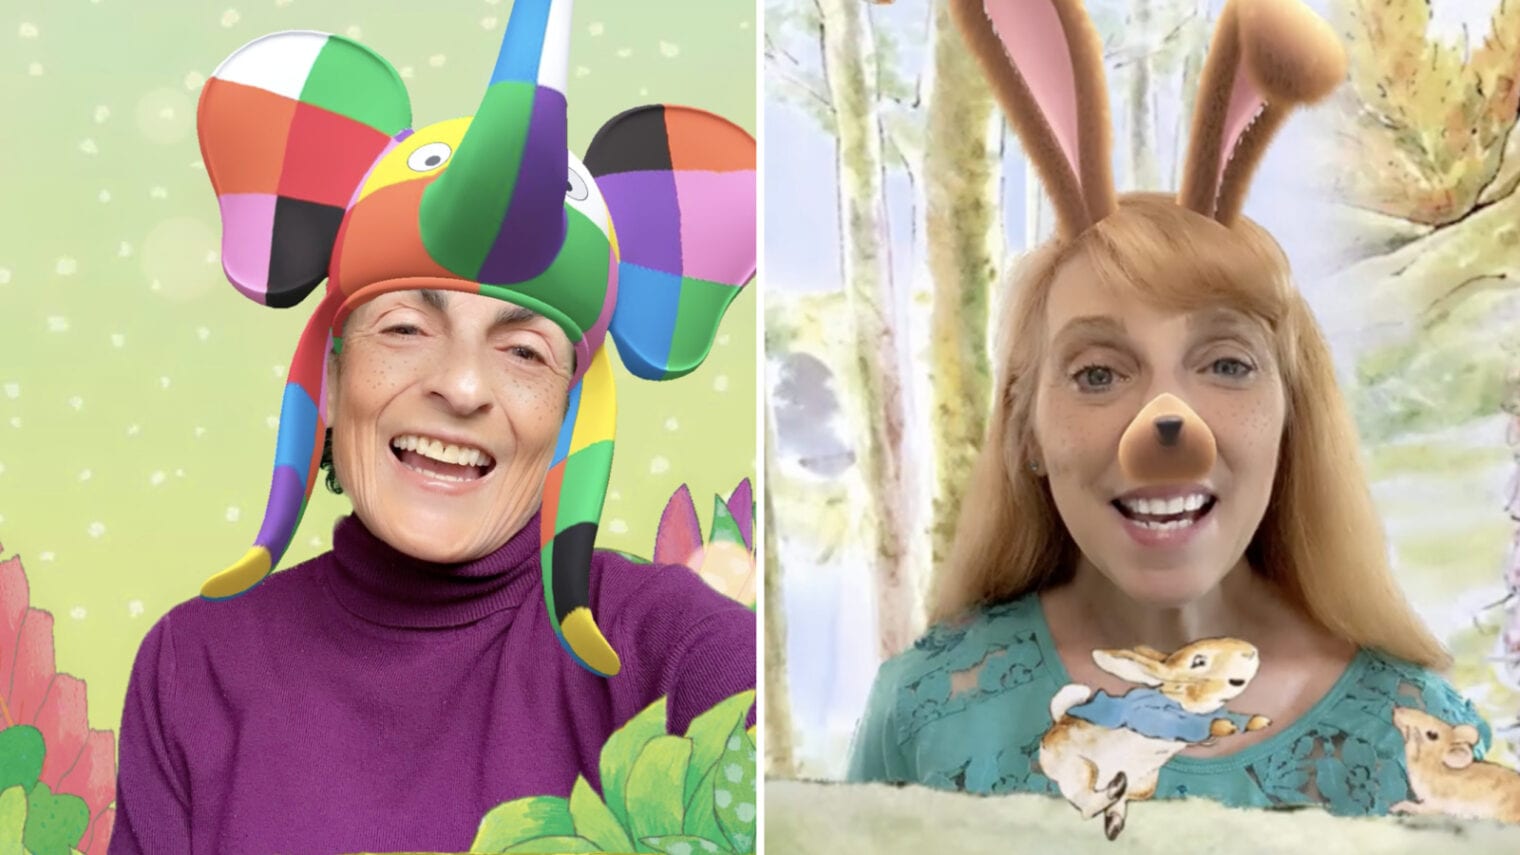 â€œPeter Rabbitâ€� and â€œElmerâ€� are two of many stories Zoogers can record with augmented reality effects. Screenshots courtesy of Zoog